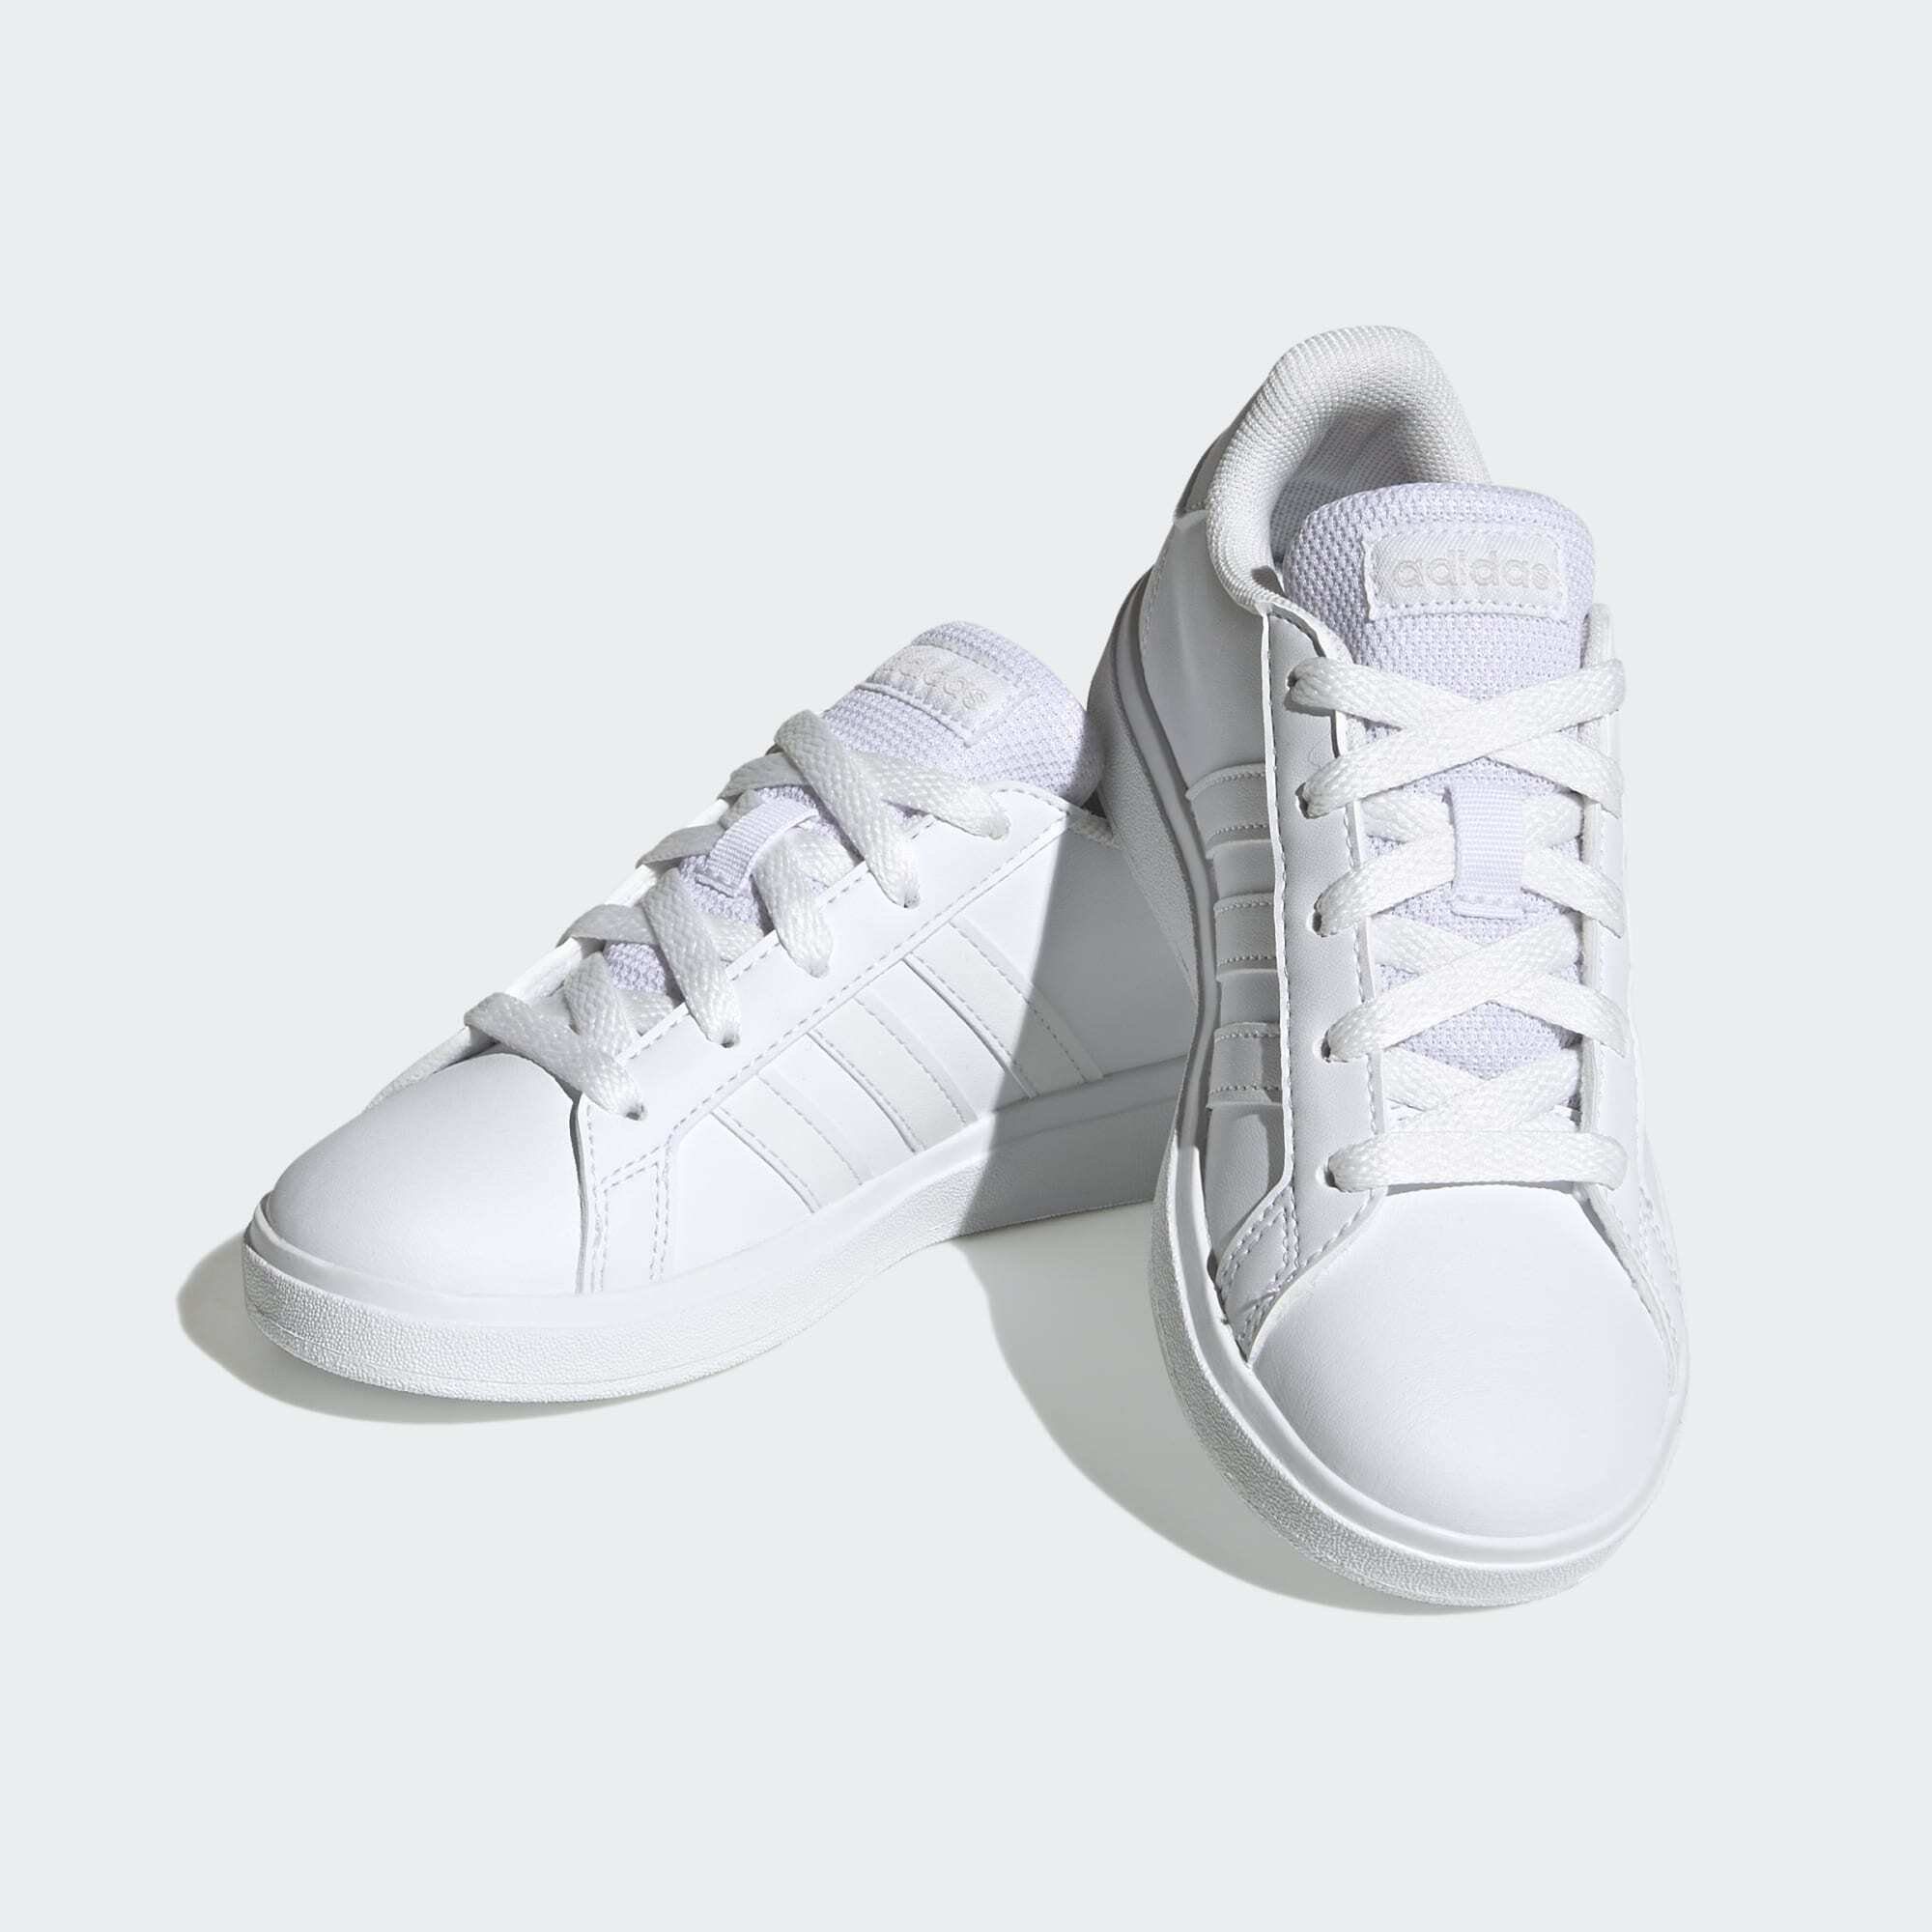 adidas Sportswear GRAND COURT LIFESTYLE TENNIS White Sneaker Cloud One / SCHUH Grey LACE-UP / White Cloud